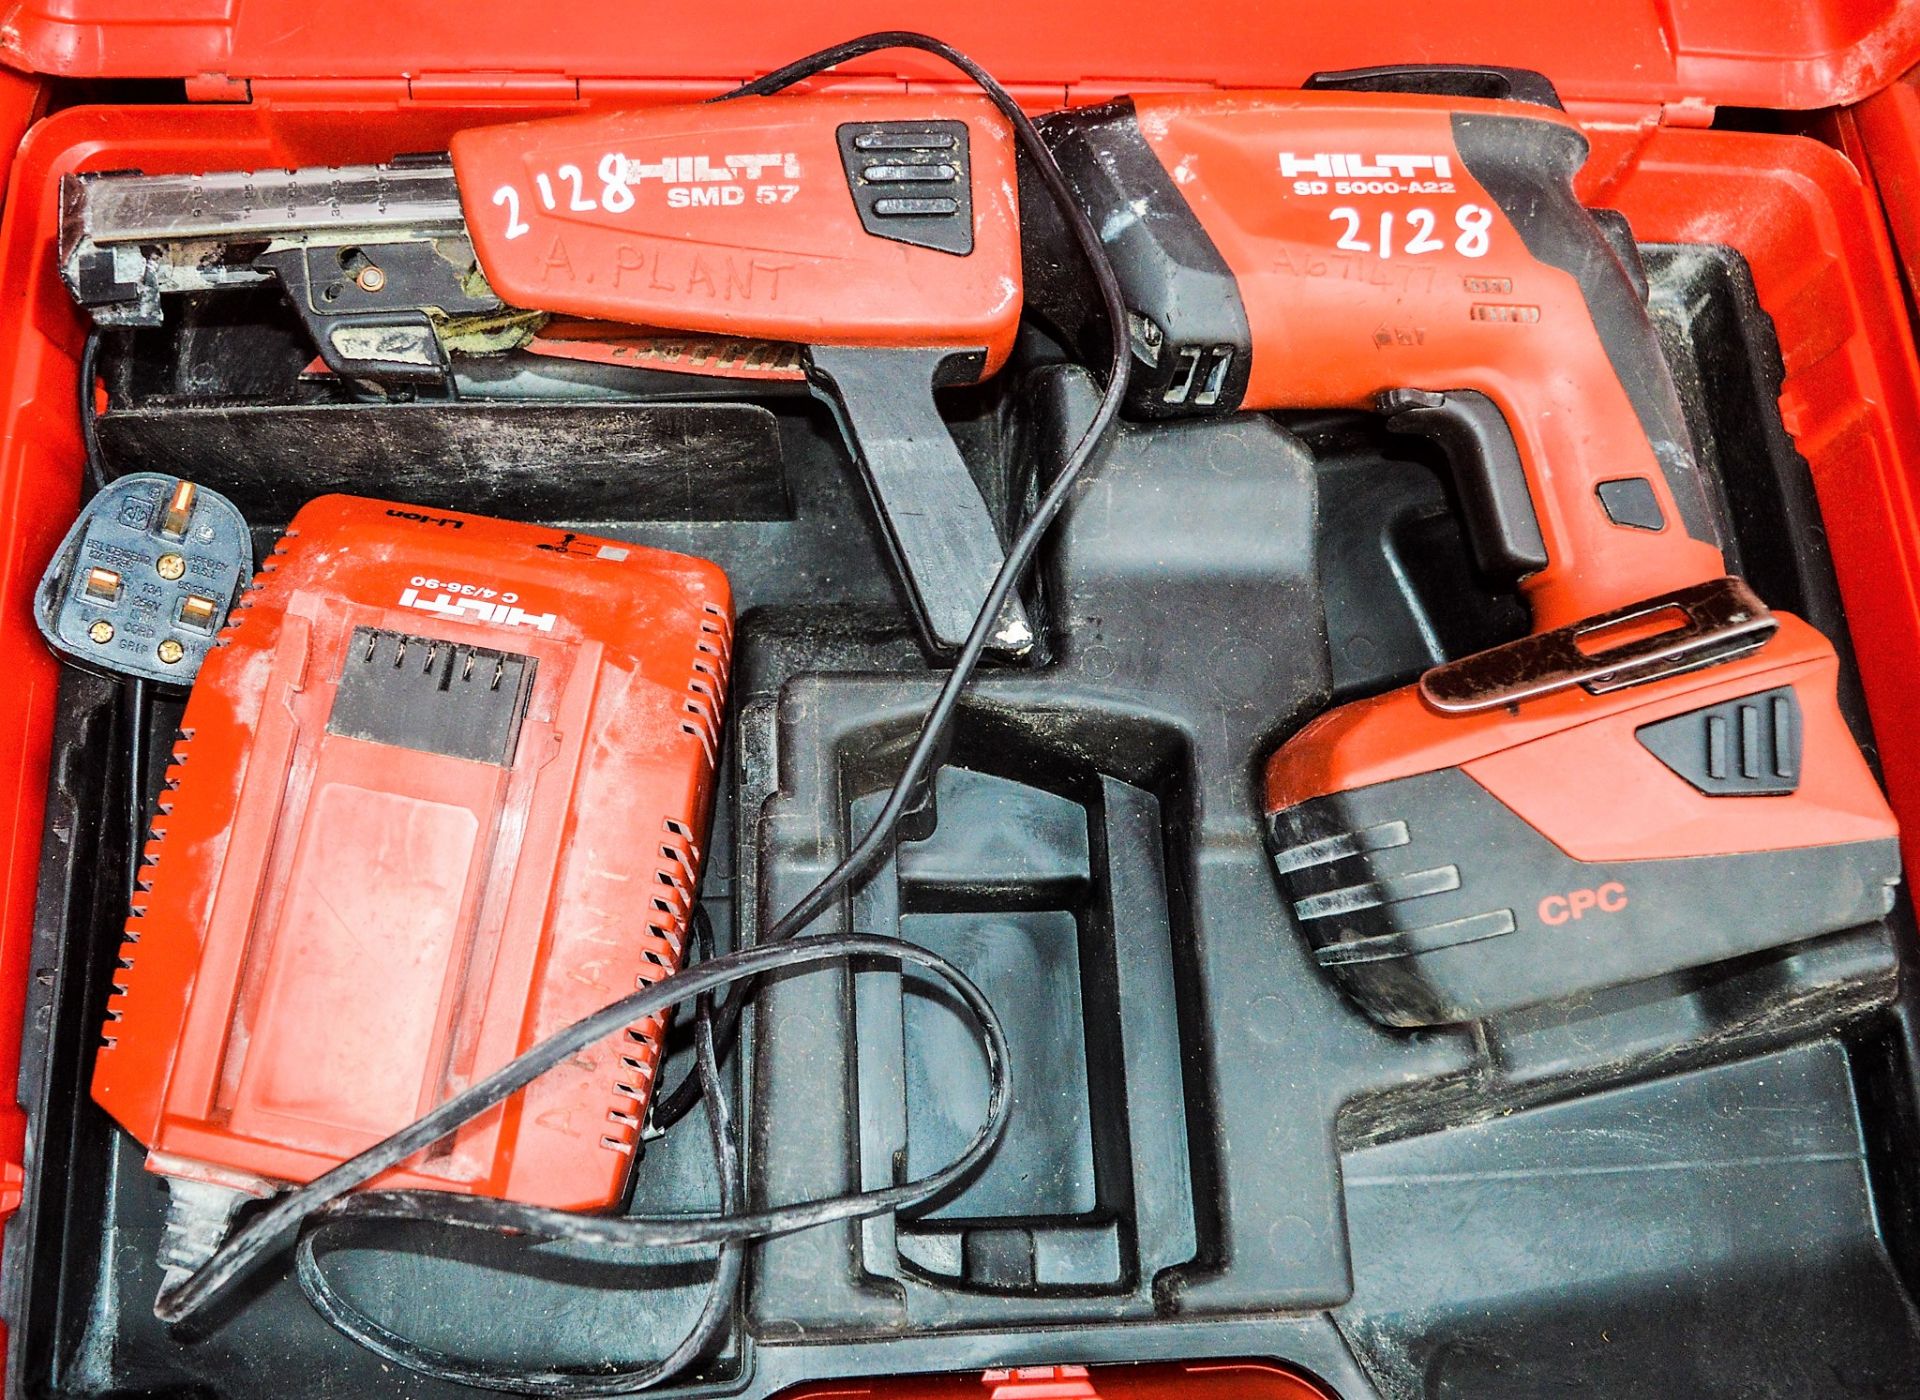 Hilti SD5000-A22 22v cordless screwgun c/w charger, battery & carry case A671477